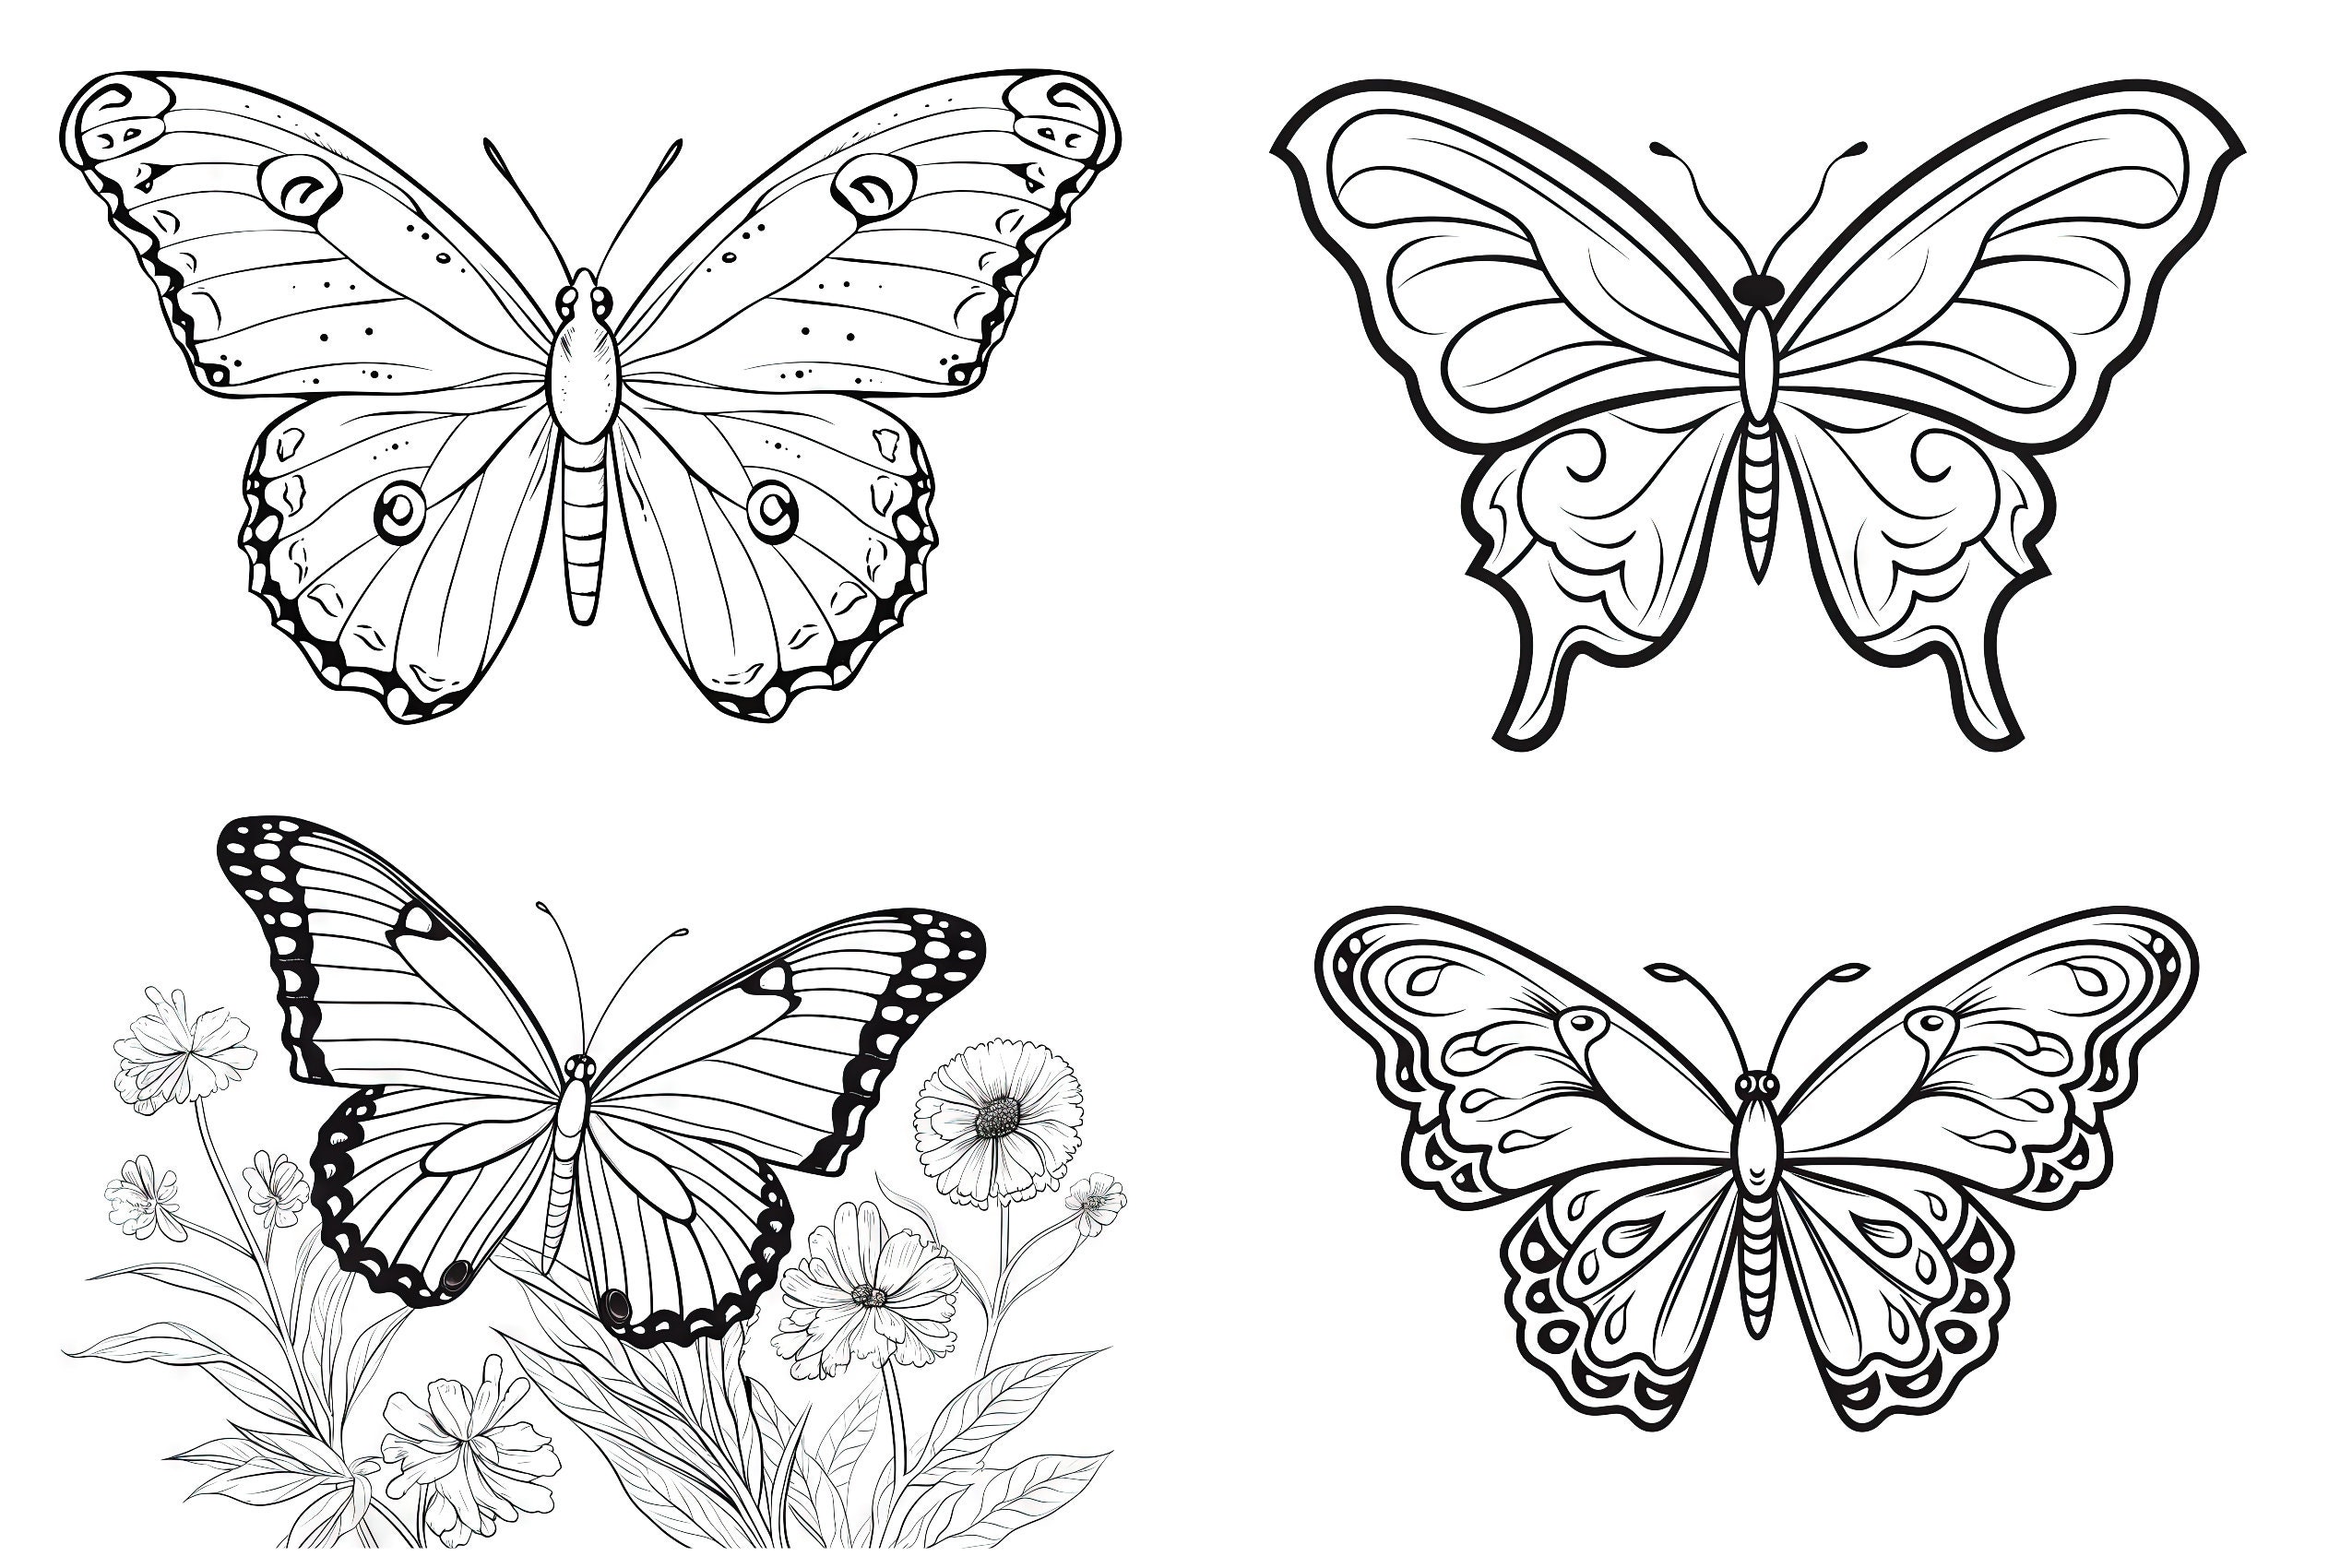 Butterfly Colouring Pages Set of 24 - Etsy